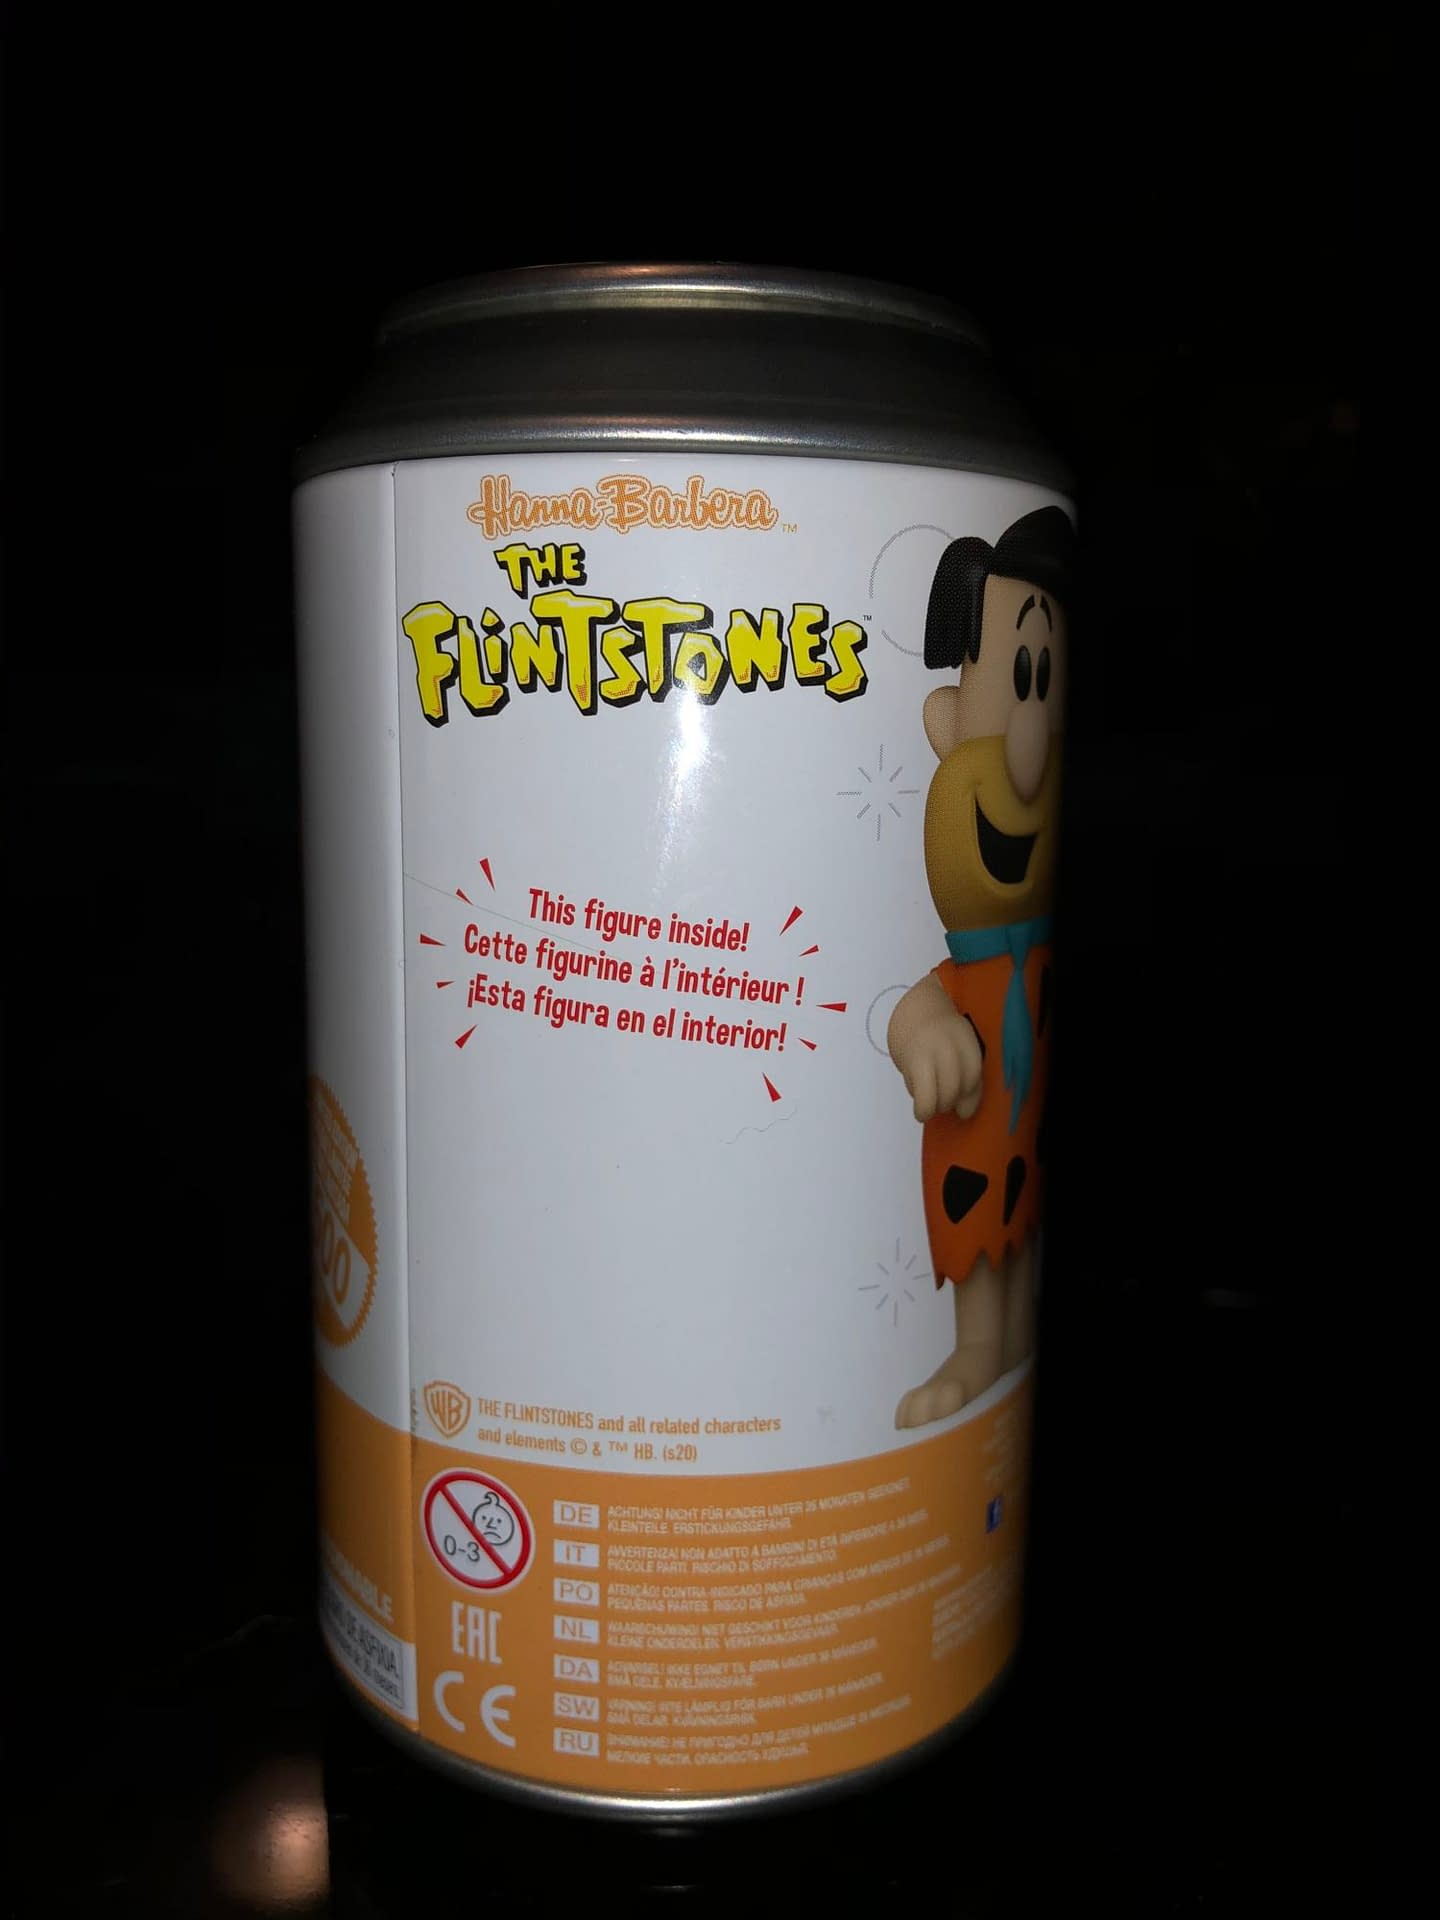 Funko Soda Brings Limited Edition Back to Collecting [Review]